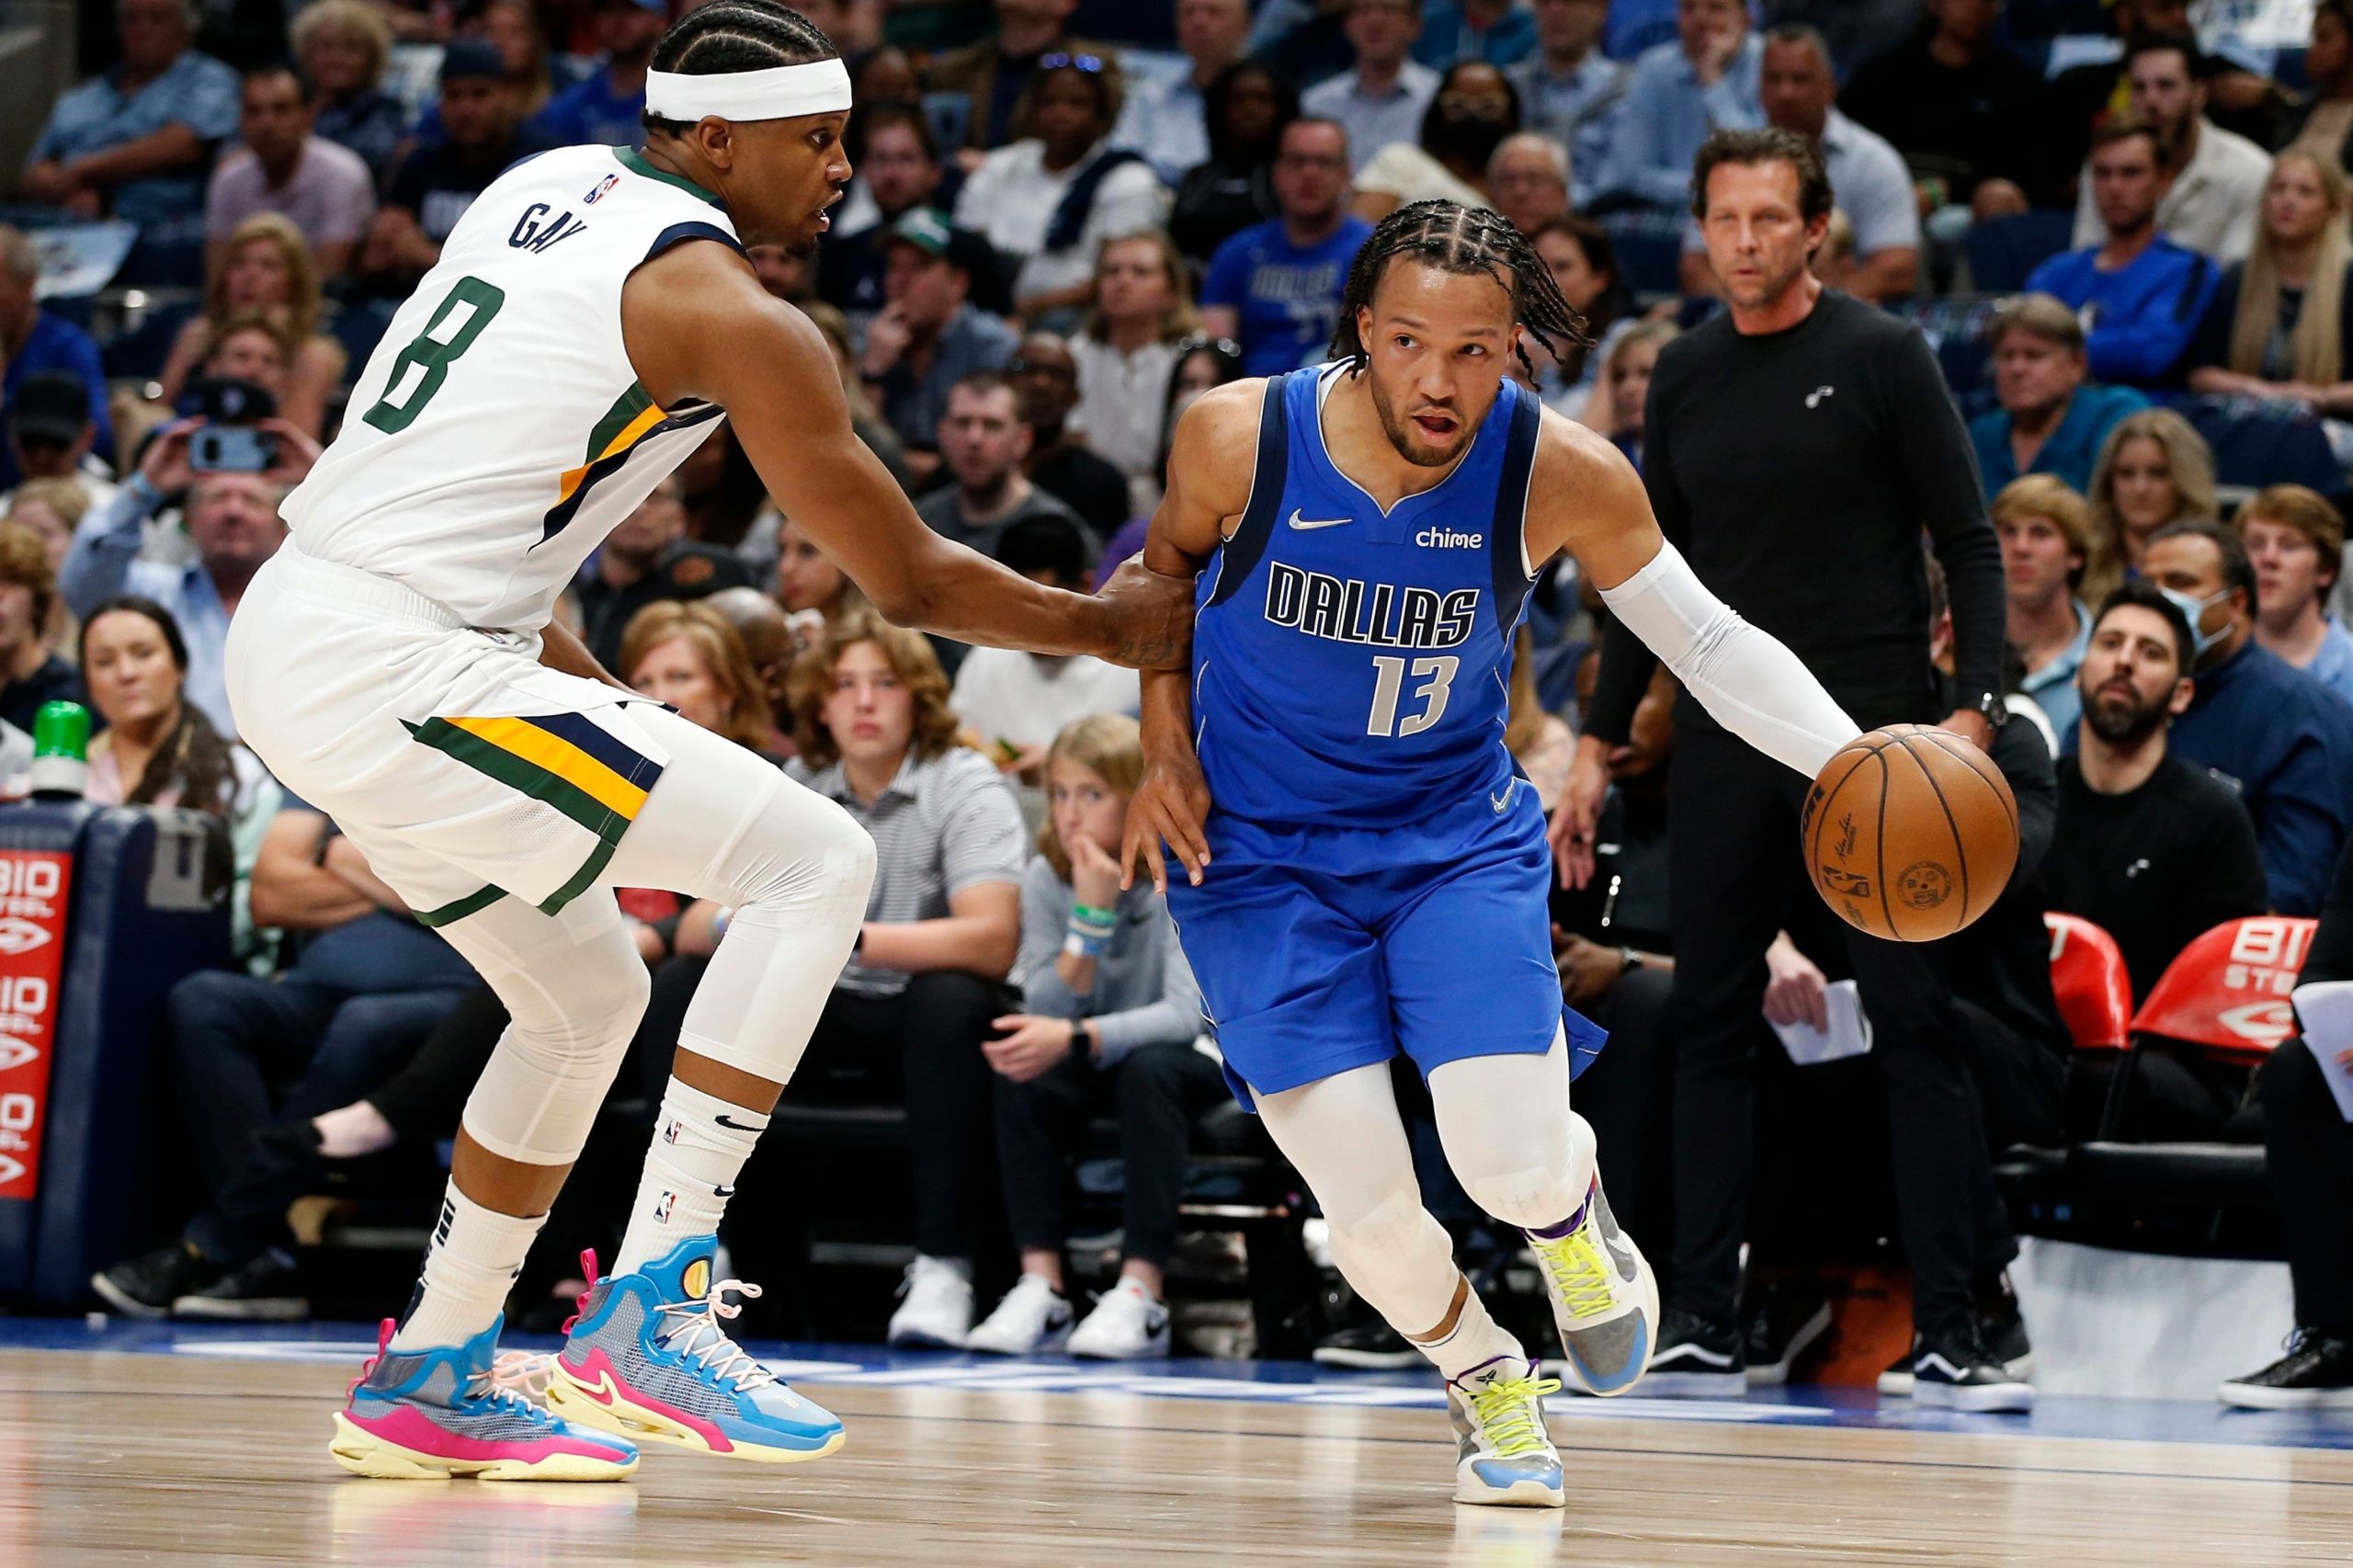 Mavericks Move Up in Playoff Standings With Win over Utah Jazz